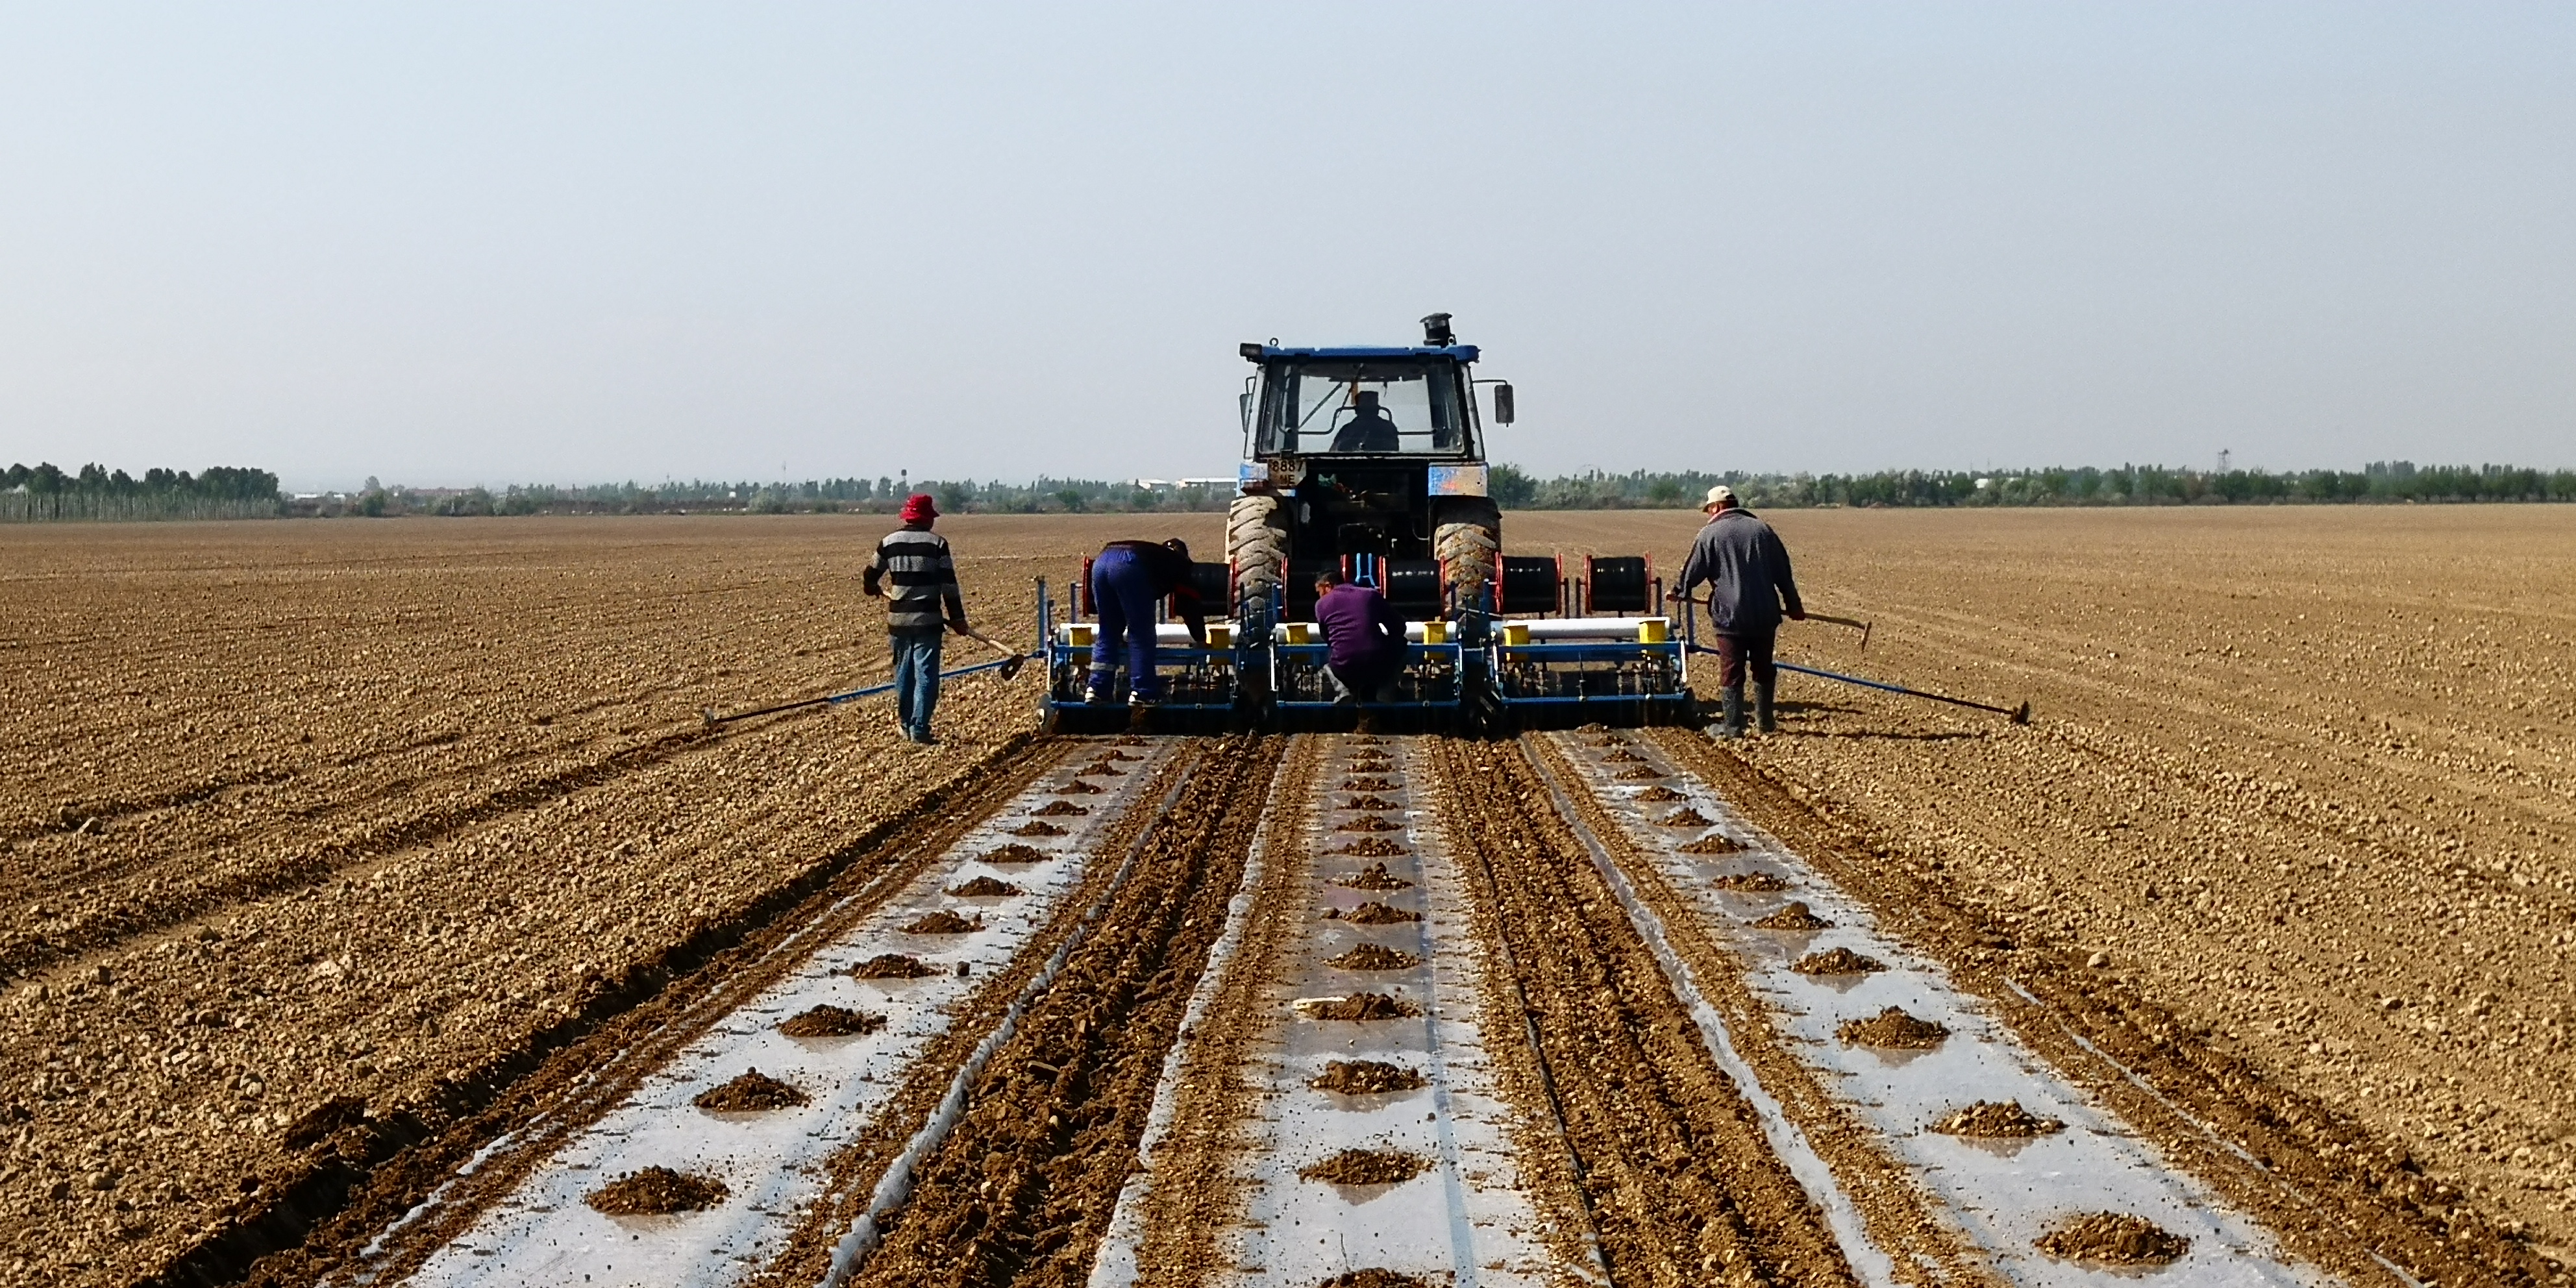 Local farmers grow cotton on China's demonstration farm with an area of 120 hectares in Uzbekistan, 2020. /Photo provided by Yang Kaiwen